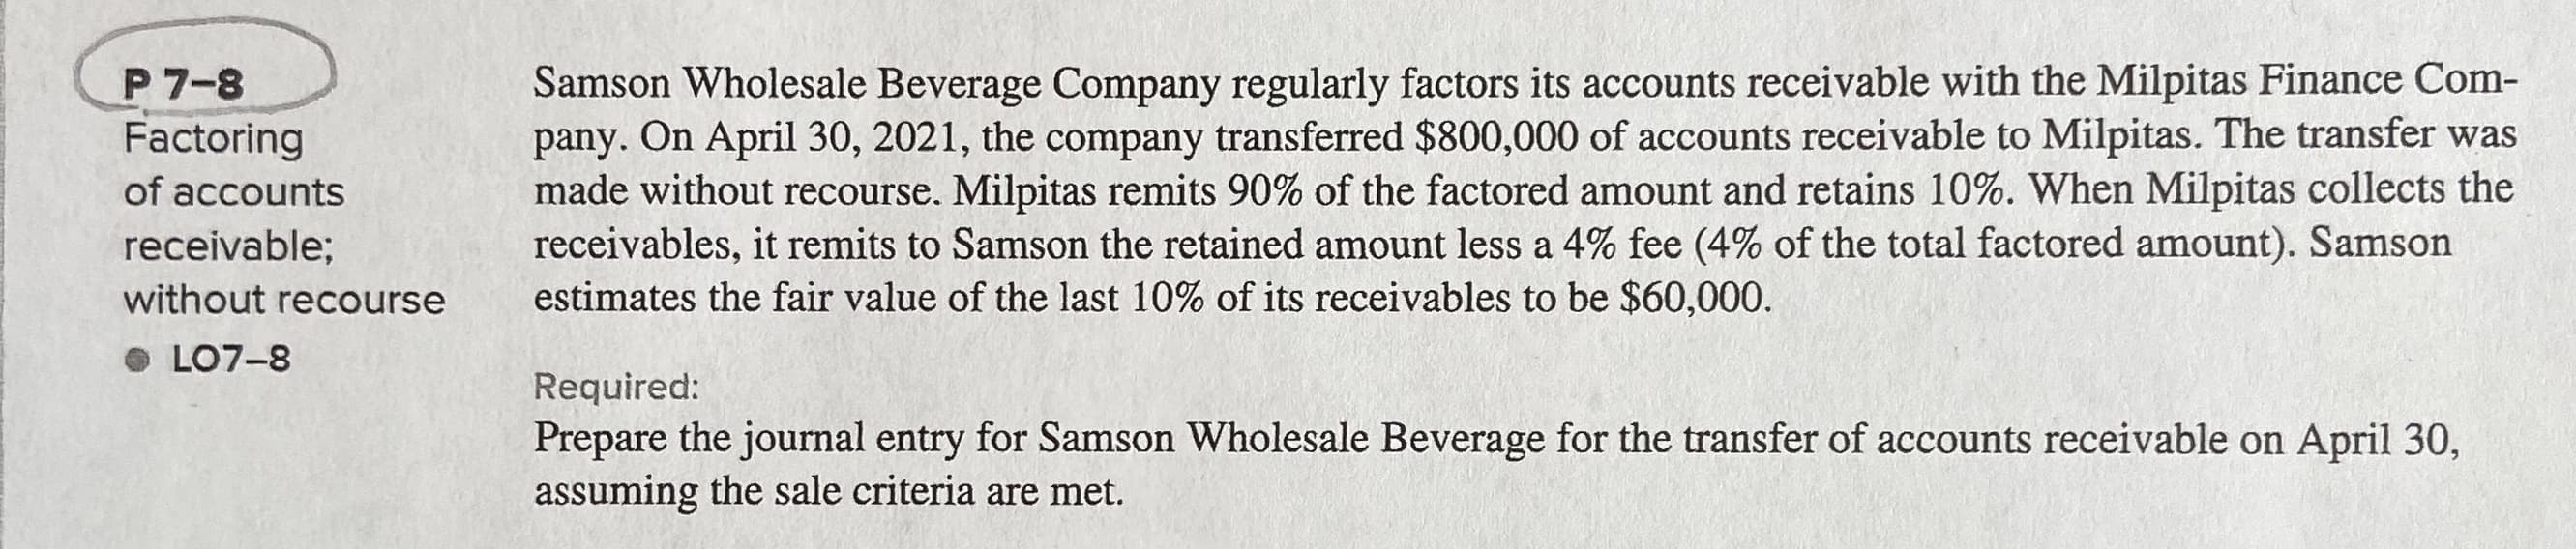 Samson Wholesale Beverage Company regularly factors its accounts receivable with the Milpitas Finance Com-
pany. On April 30, 2021, the company transferred $800,000 of accounts receivable to Milpitas. The transfer was
made without recourse. Milpitas remits 90% of the factored amount and retains 10%. When Milpitas collects the
receivables, it remits to Samson the retained amount less a 4% fee (4% of the total factored amount). Samson
estimates the fair value of the last 10% of its receivables to be $60,000.
P 7-8
Factoring
of accounts
receivable;
without recourse
• LO7-8
Required:
Prepare the journal entry for Samson Wholesale Beverage for the transfer of accounts receivable on April 30,
assuming the sale criteria are met.
